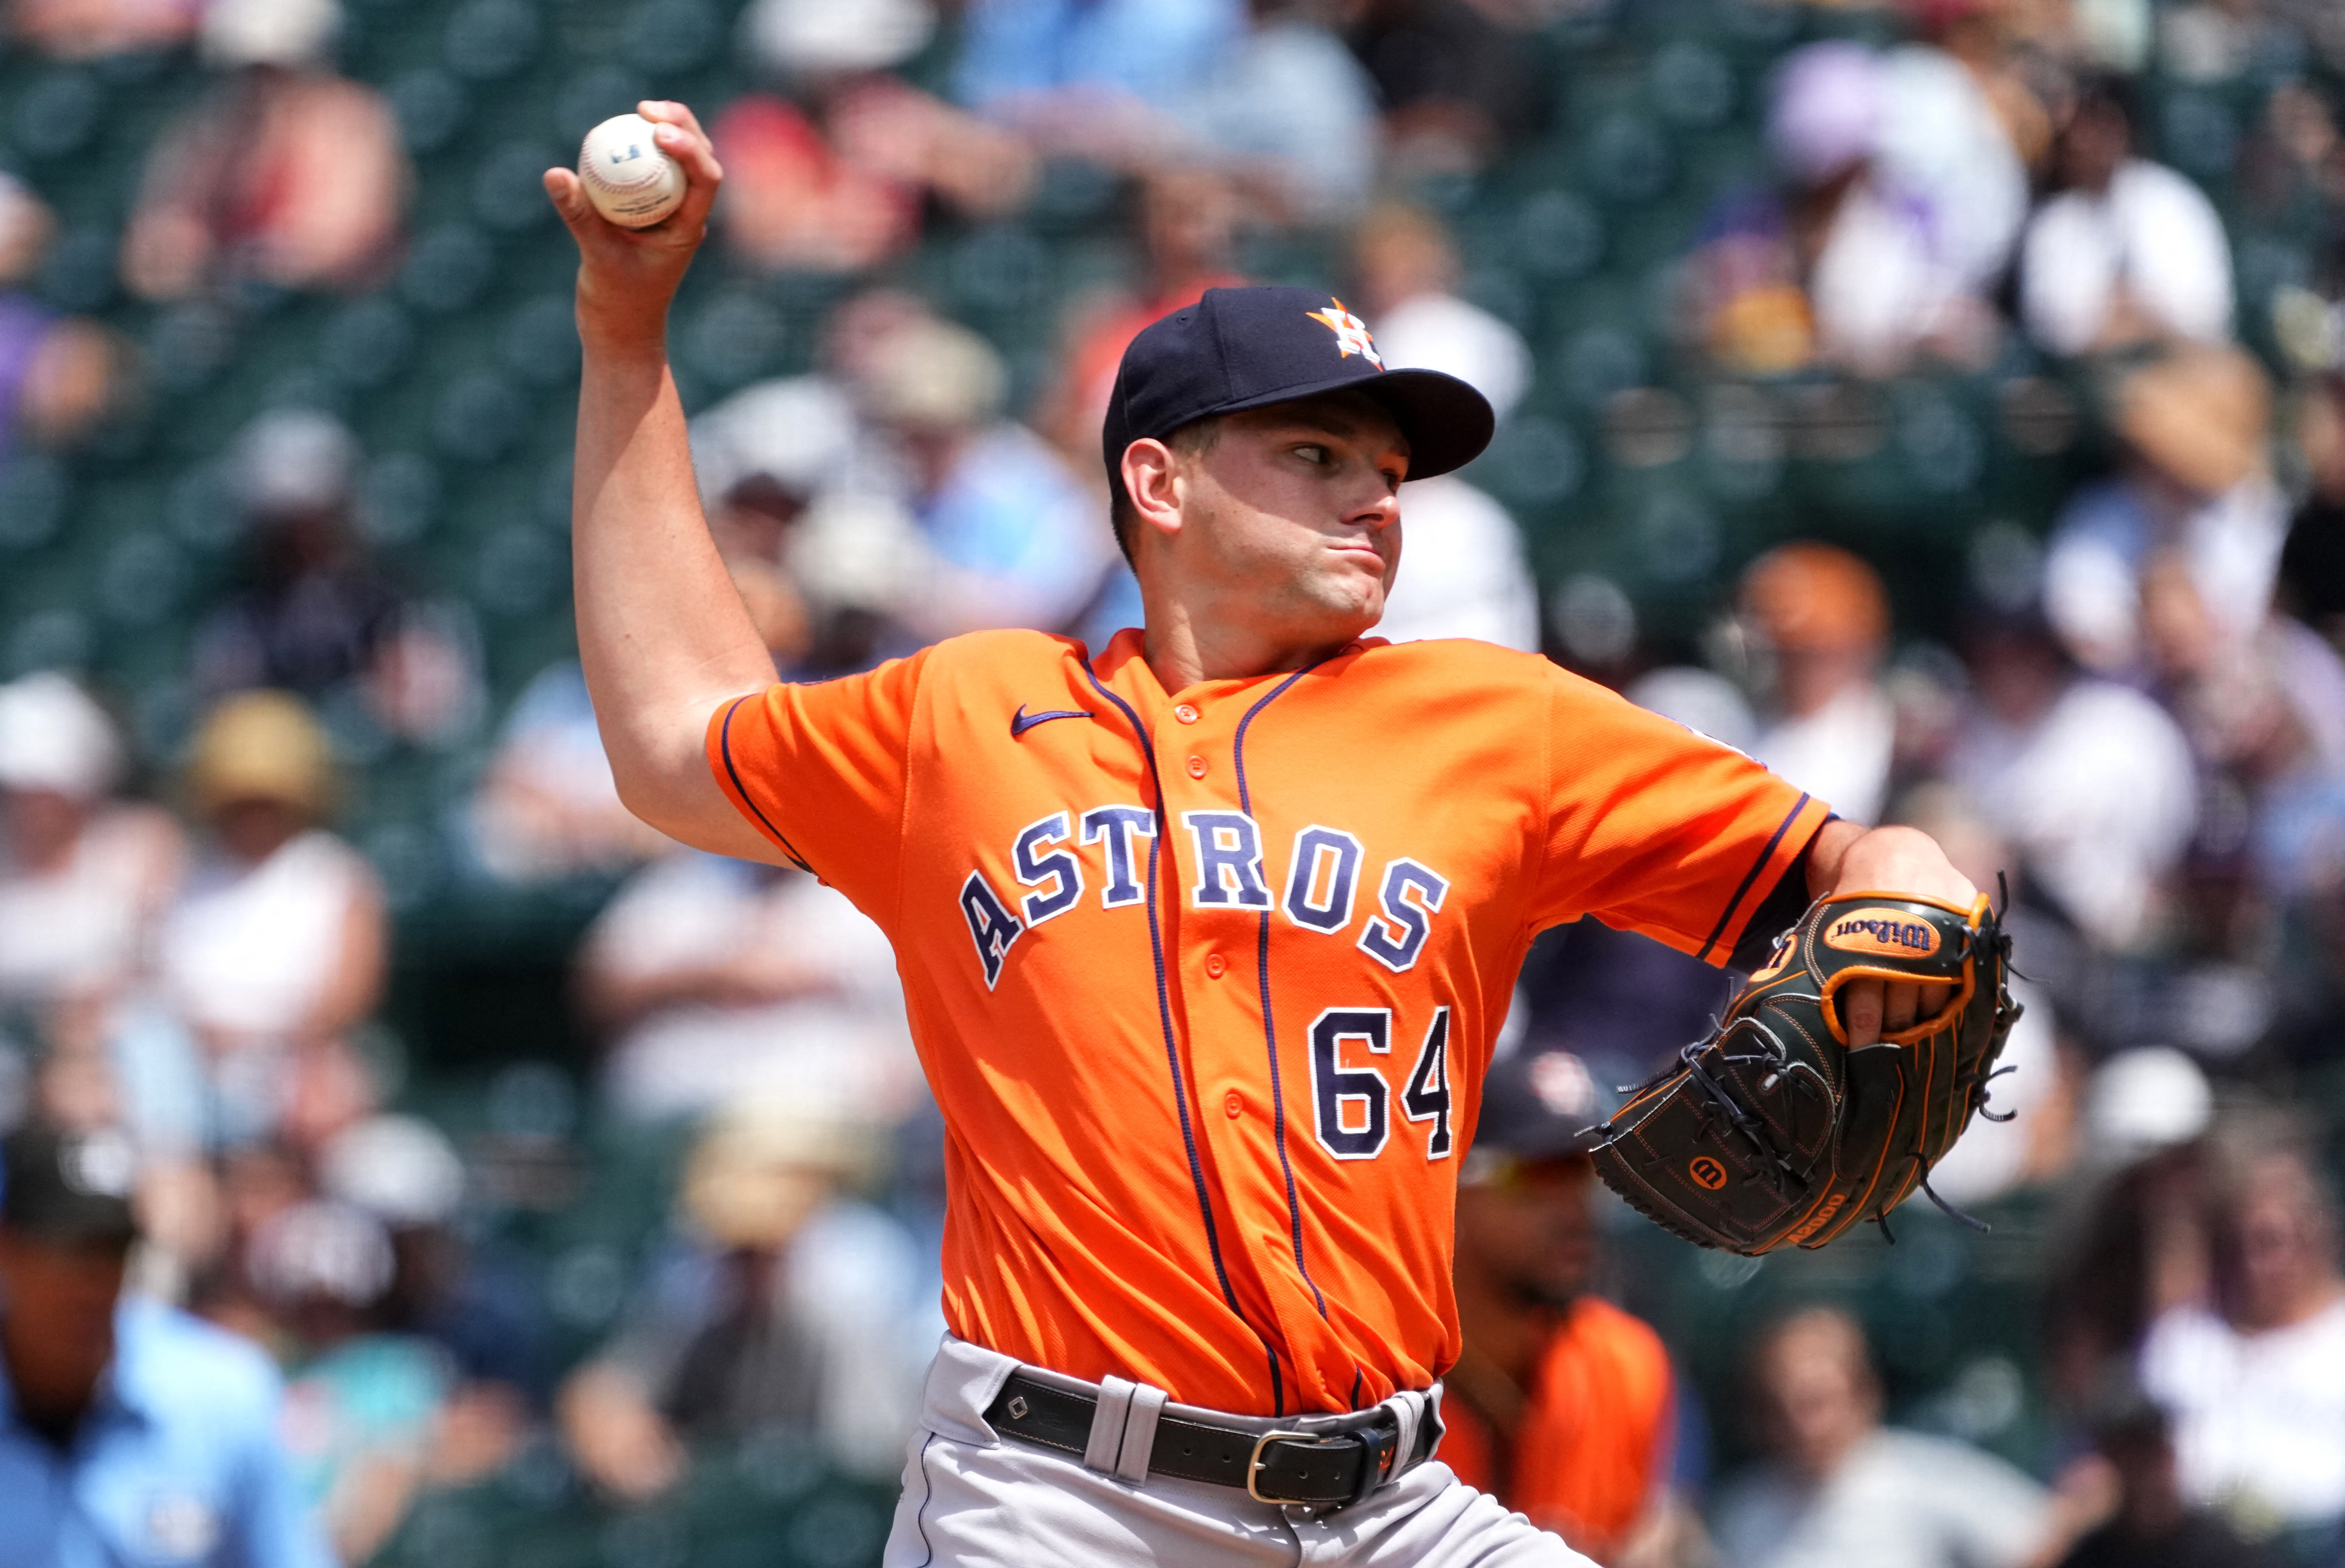 Astros allow just two hits in 4-1 win over Rockies